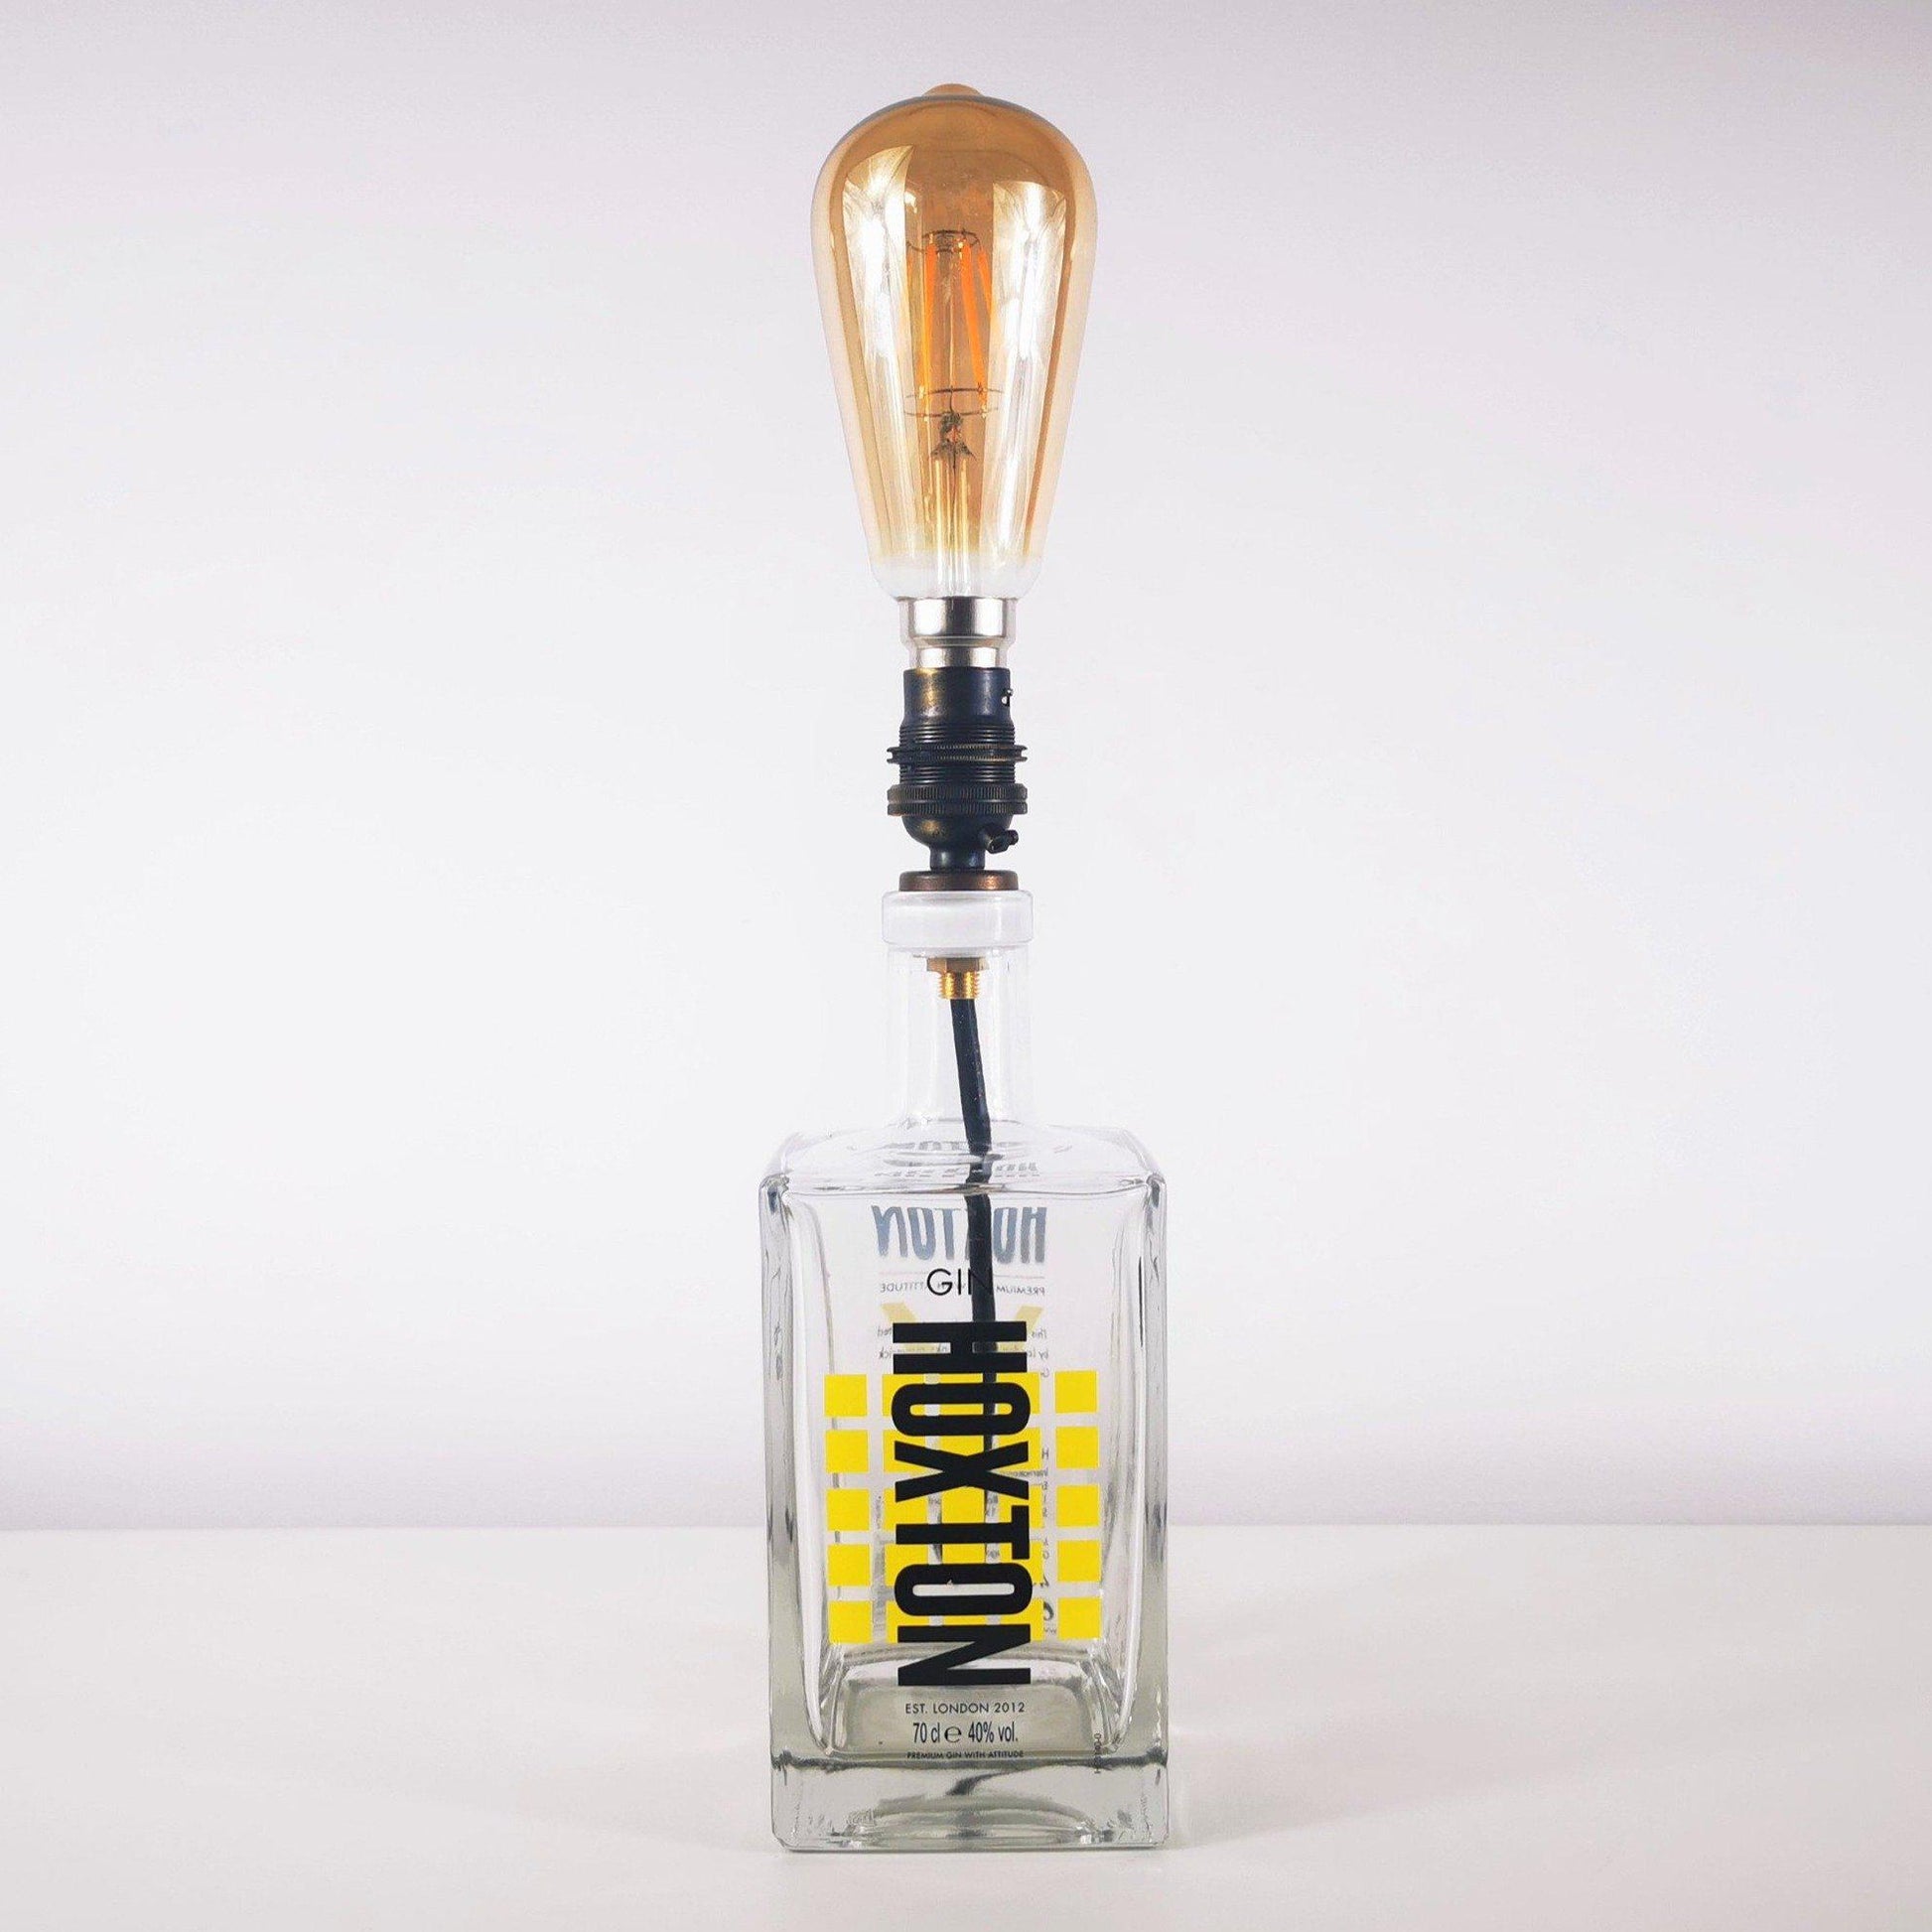 Hoxton Gin Bottle Table Lamp Gin Bottle Table Lamps